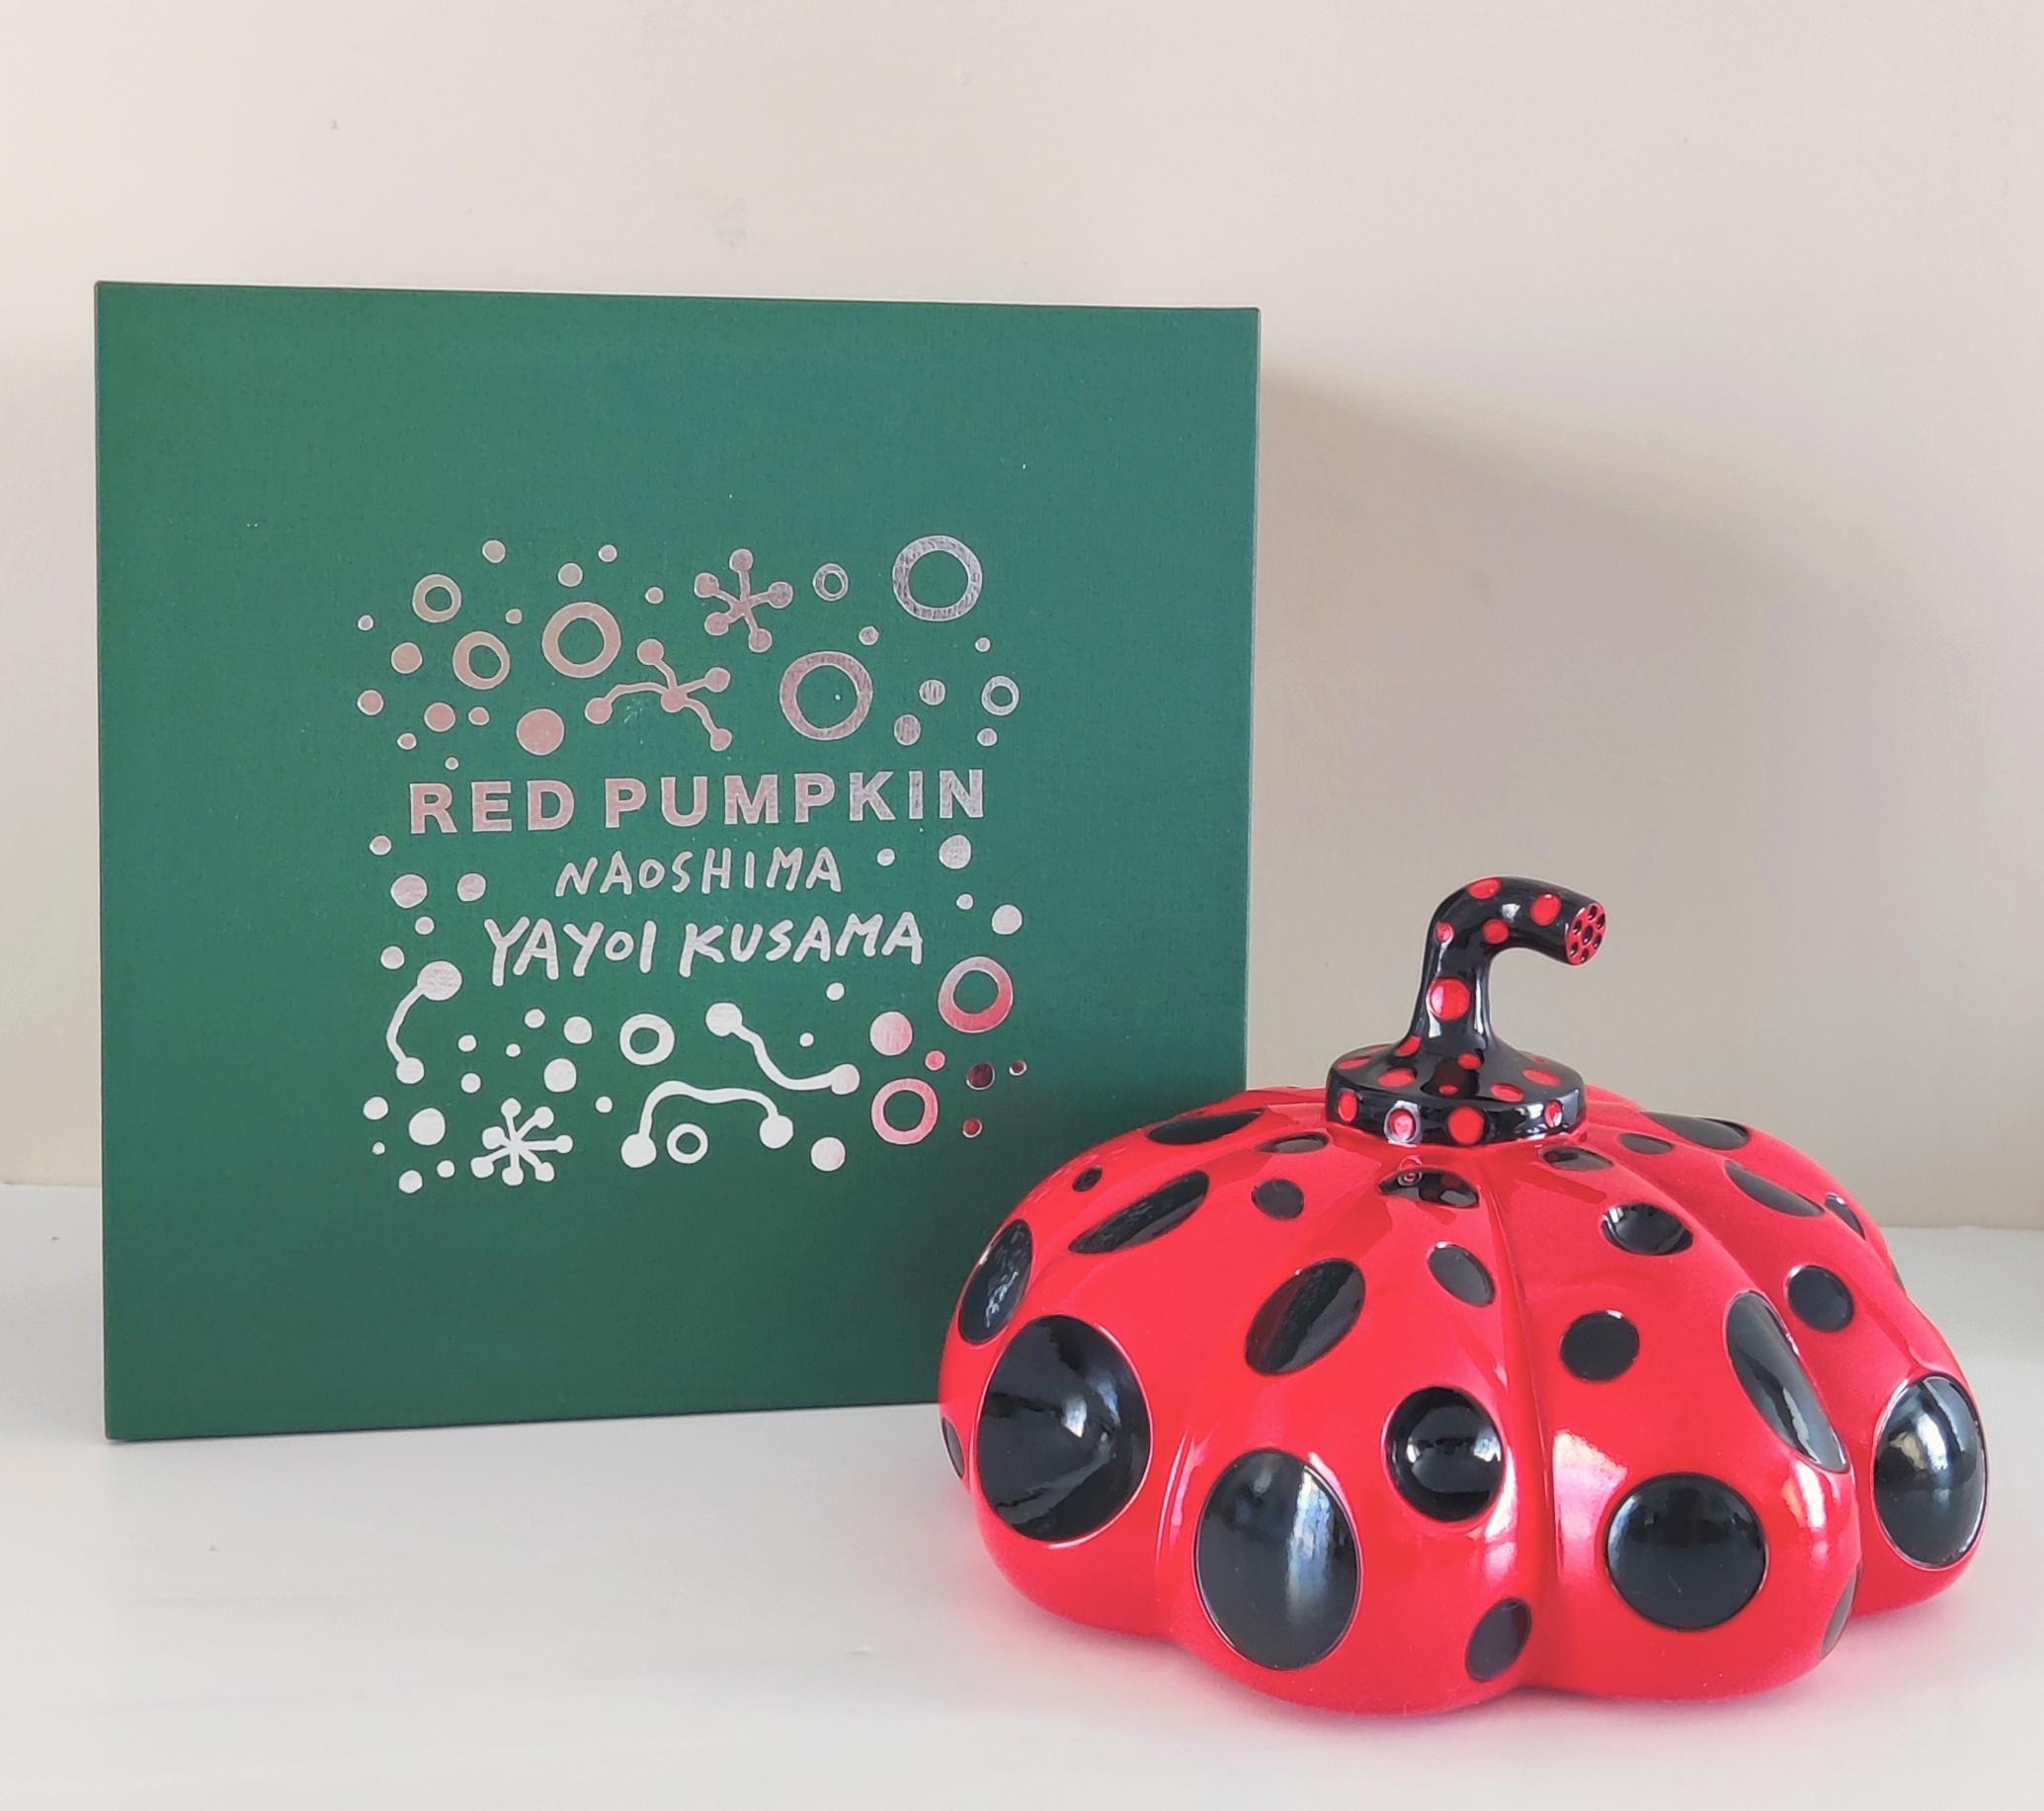 Naoshima Red Pumpkin

with the artist's copyright stamp and the title (on the underside)

cast resin multiple painted in colors, with the original presentation box, new condition

size: 9 cm x 14 cm x 14 cm

Executed in 2019; this multiple is from